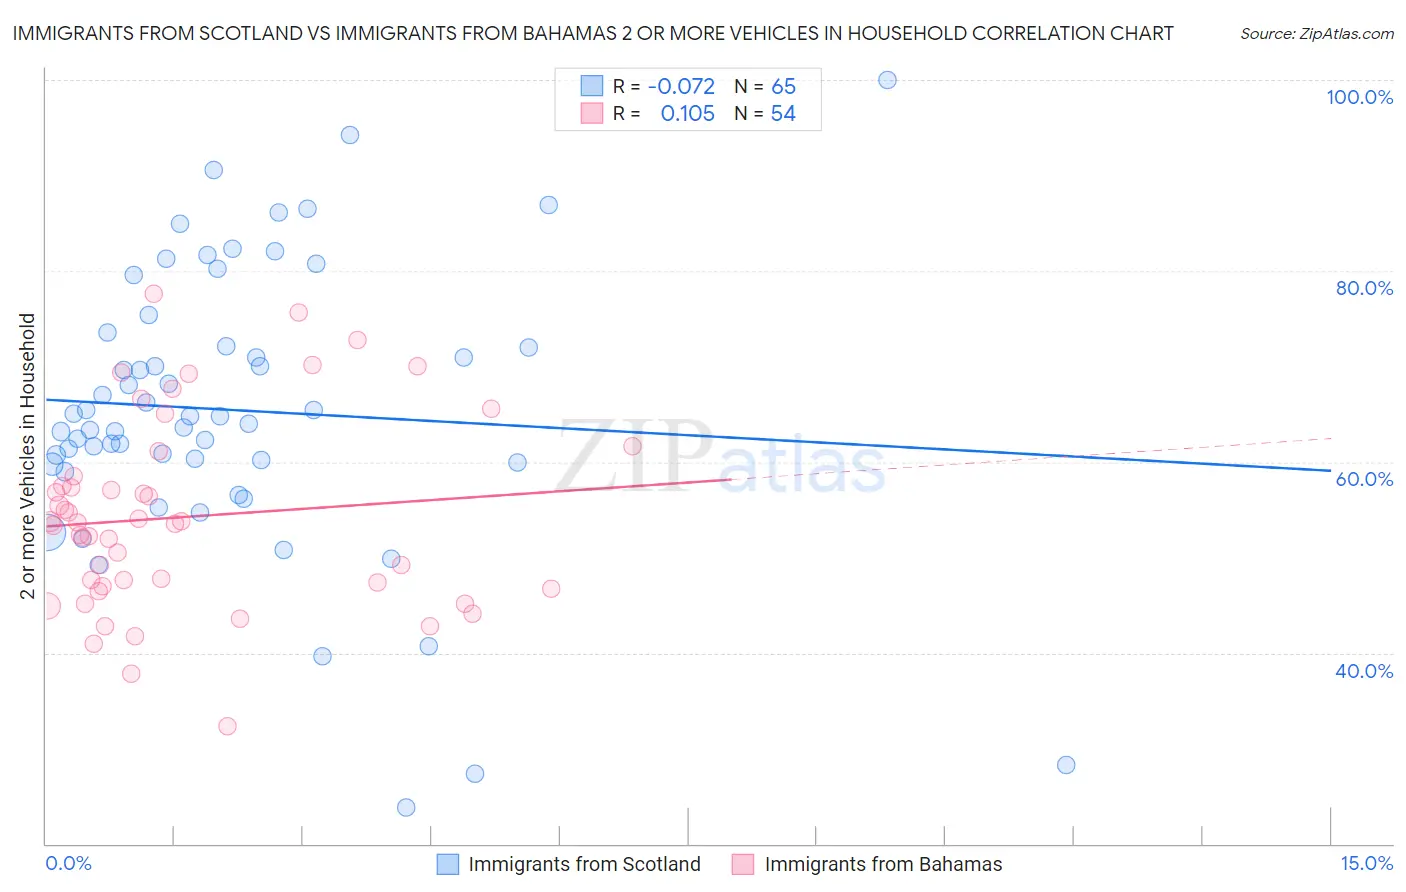 Immigrants from Scotland vs Immigrants from Bahamas 2 or more Vehicles in Household